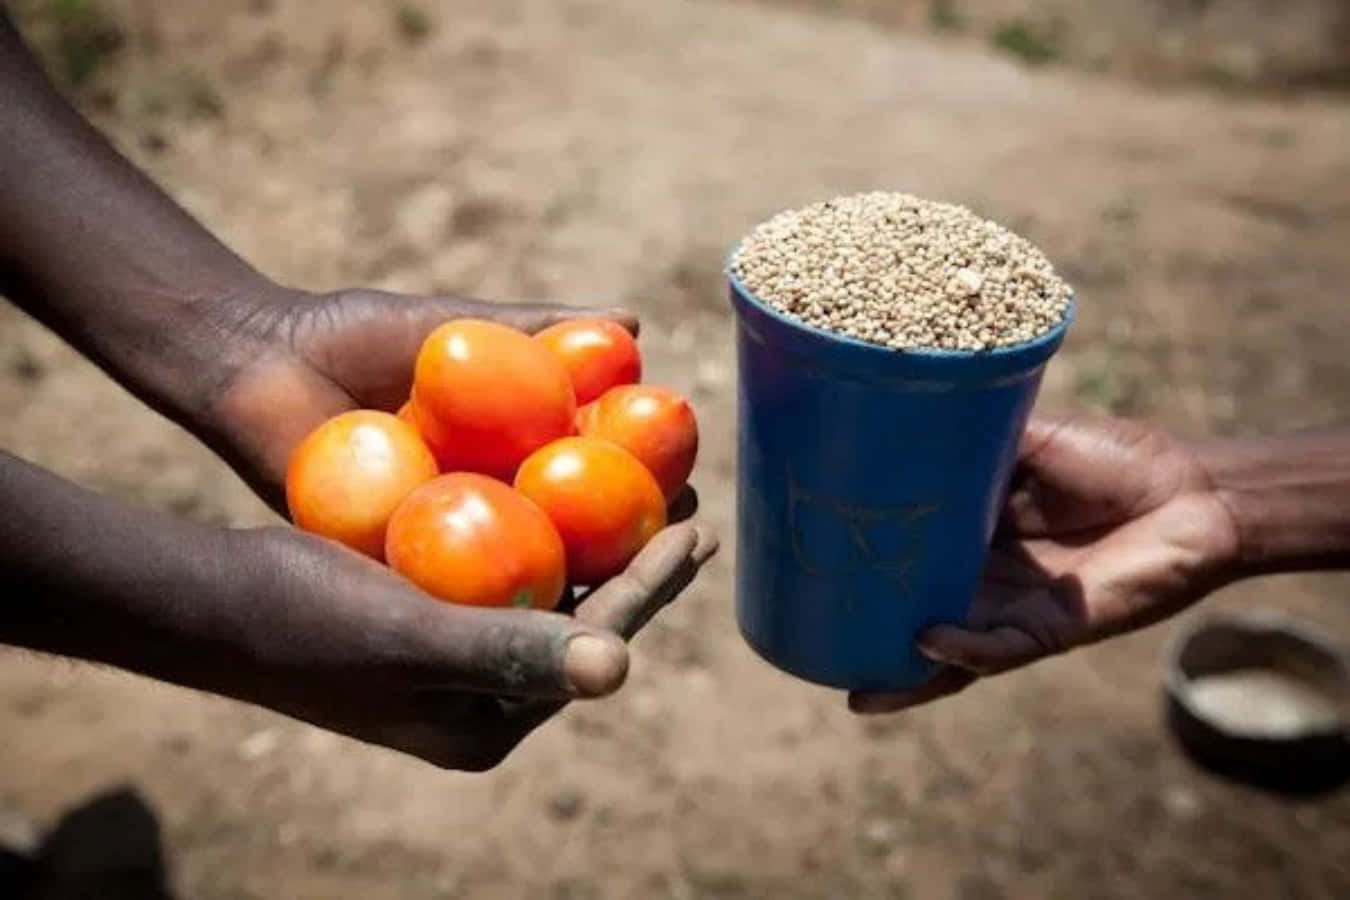 Two Hands Are Holding Tomatoes And A Cup